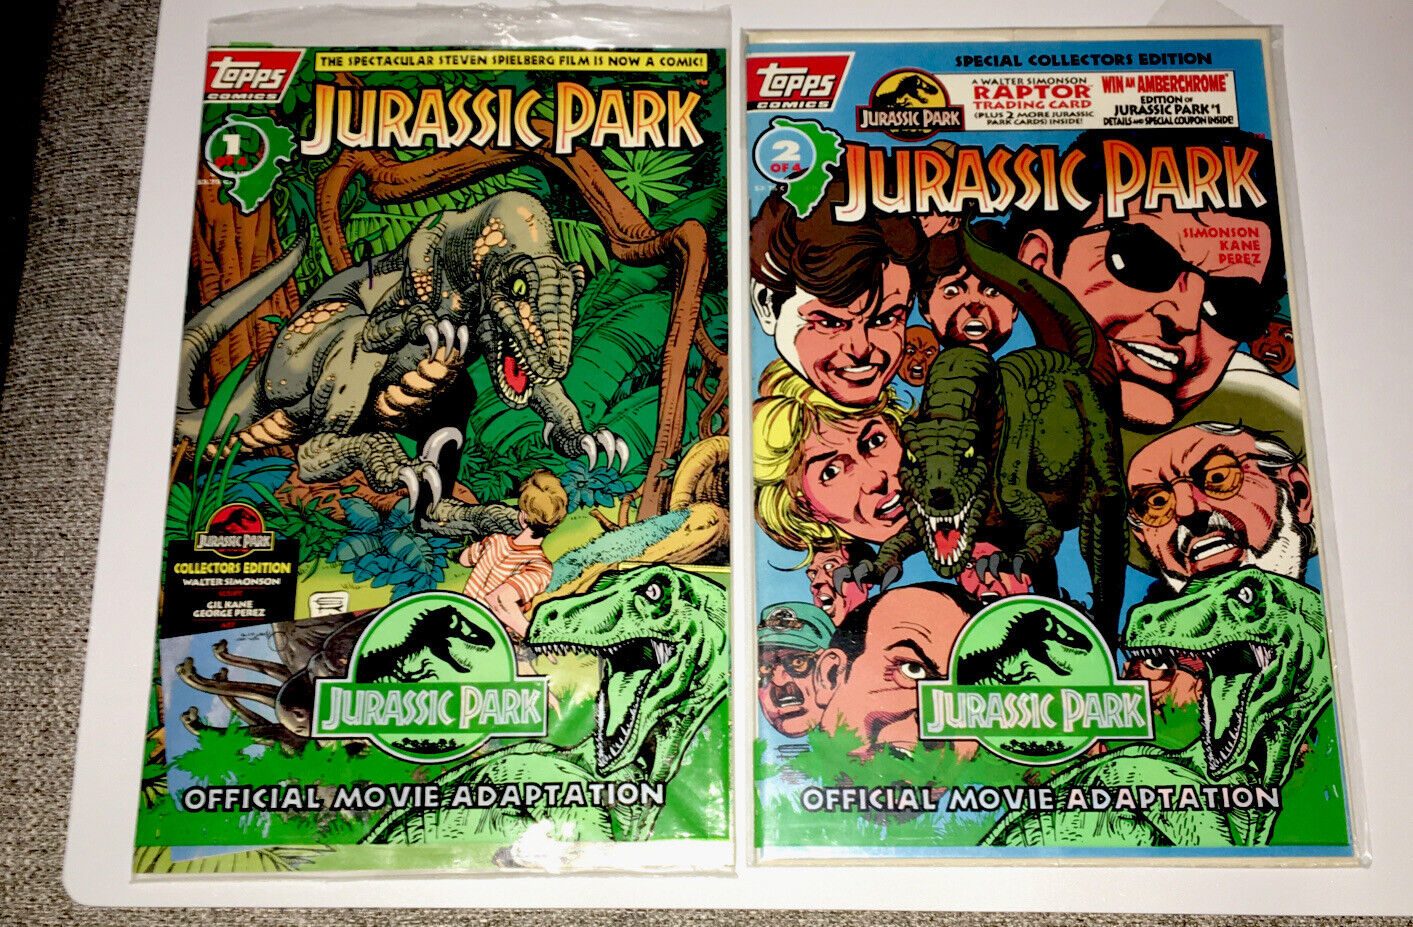 JURASSIC PARK MOVIE EDITION #1 & #2 FACTORY SEALED 1993 TOPPS COMIC BOOK